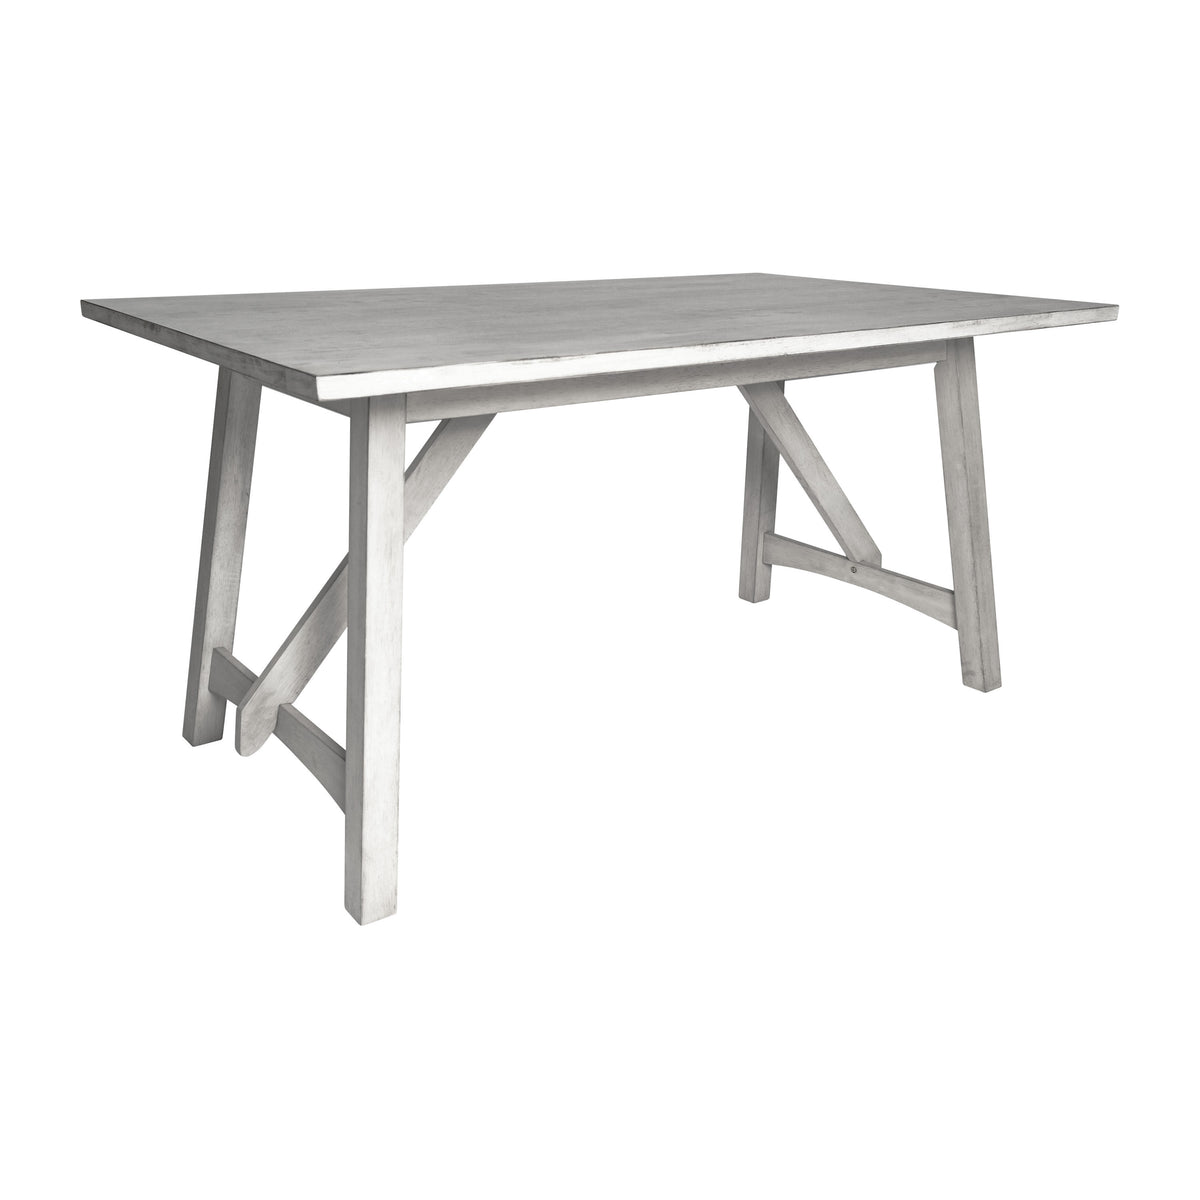 Antique White |#| Solid Wood 60inch Commercial Grade Trestle Base Dining Table-Light Cappuccino